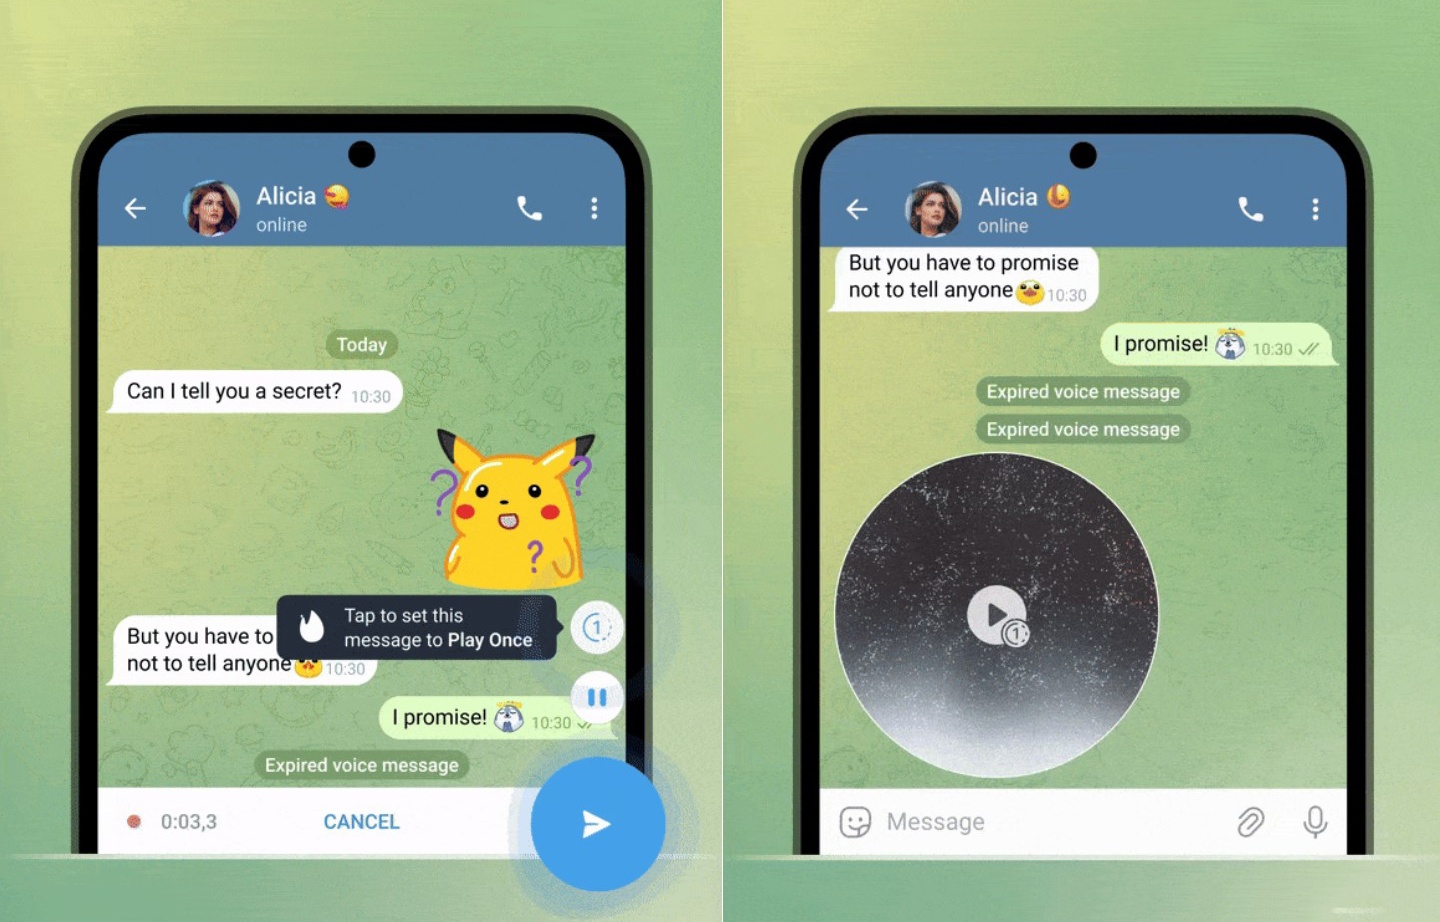 Telegram has added self-destructible voice and video messages